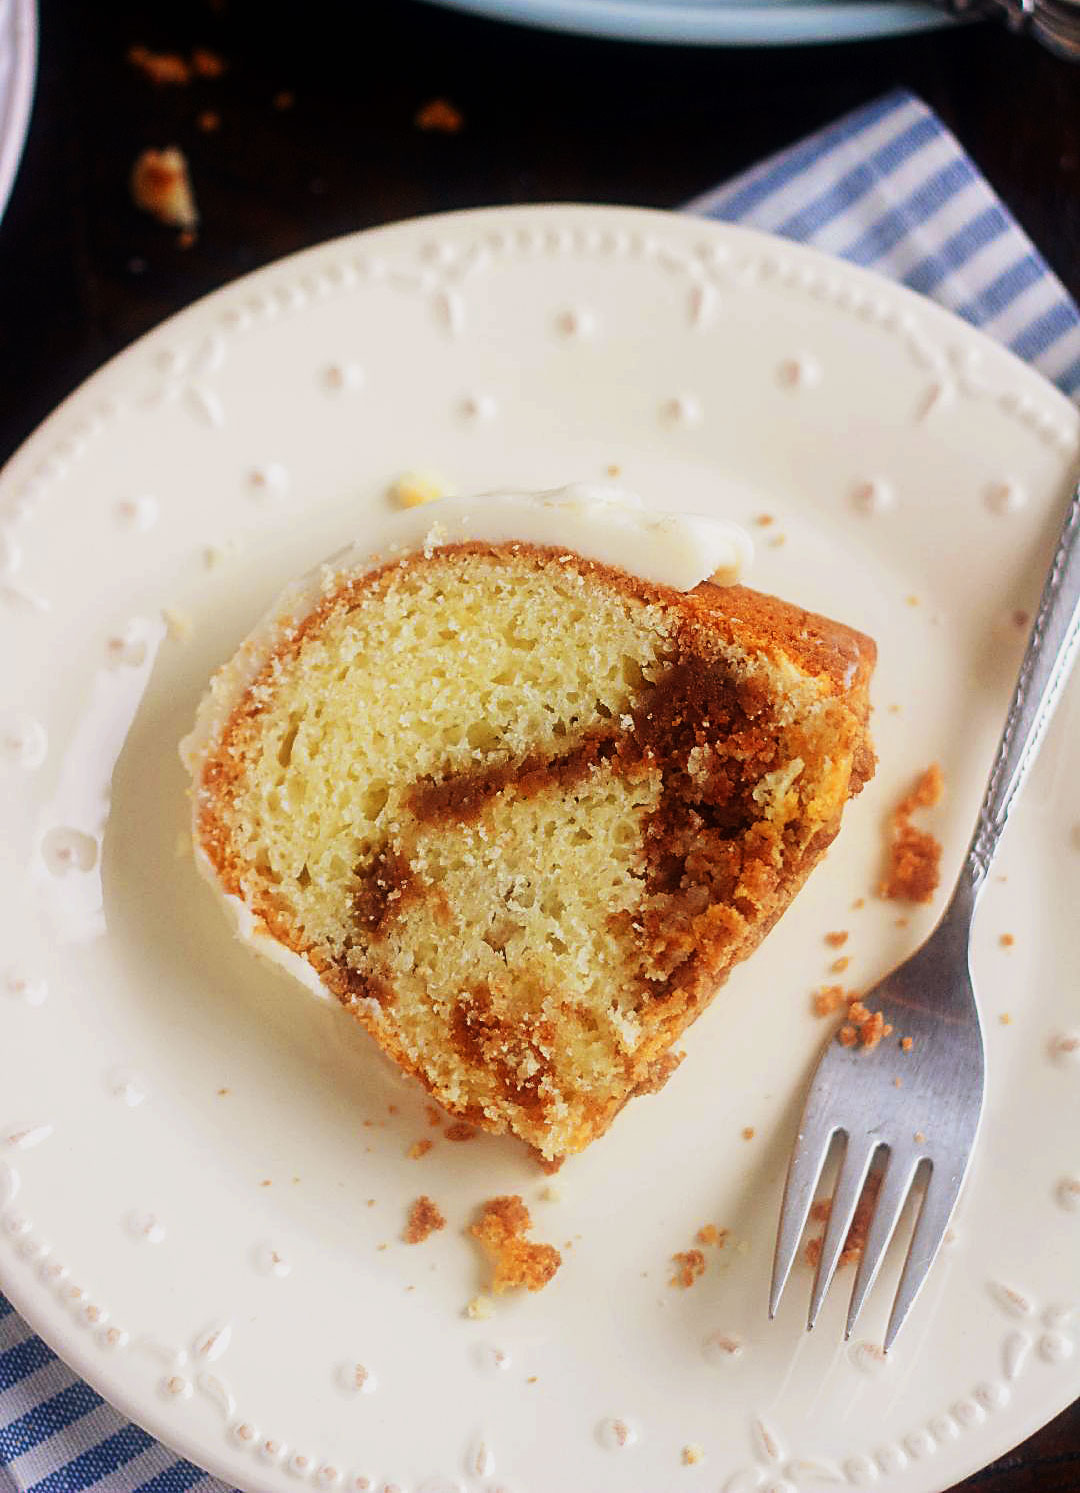 Sour Cream Coffee Cake with Browned Butter Glaze is a delicious cake with cinnamon streusel swirled throughout that is topped with a browned butter glaze. Life-in-the-Lofthouse.com